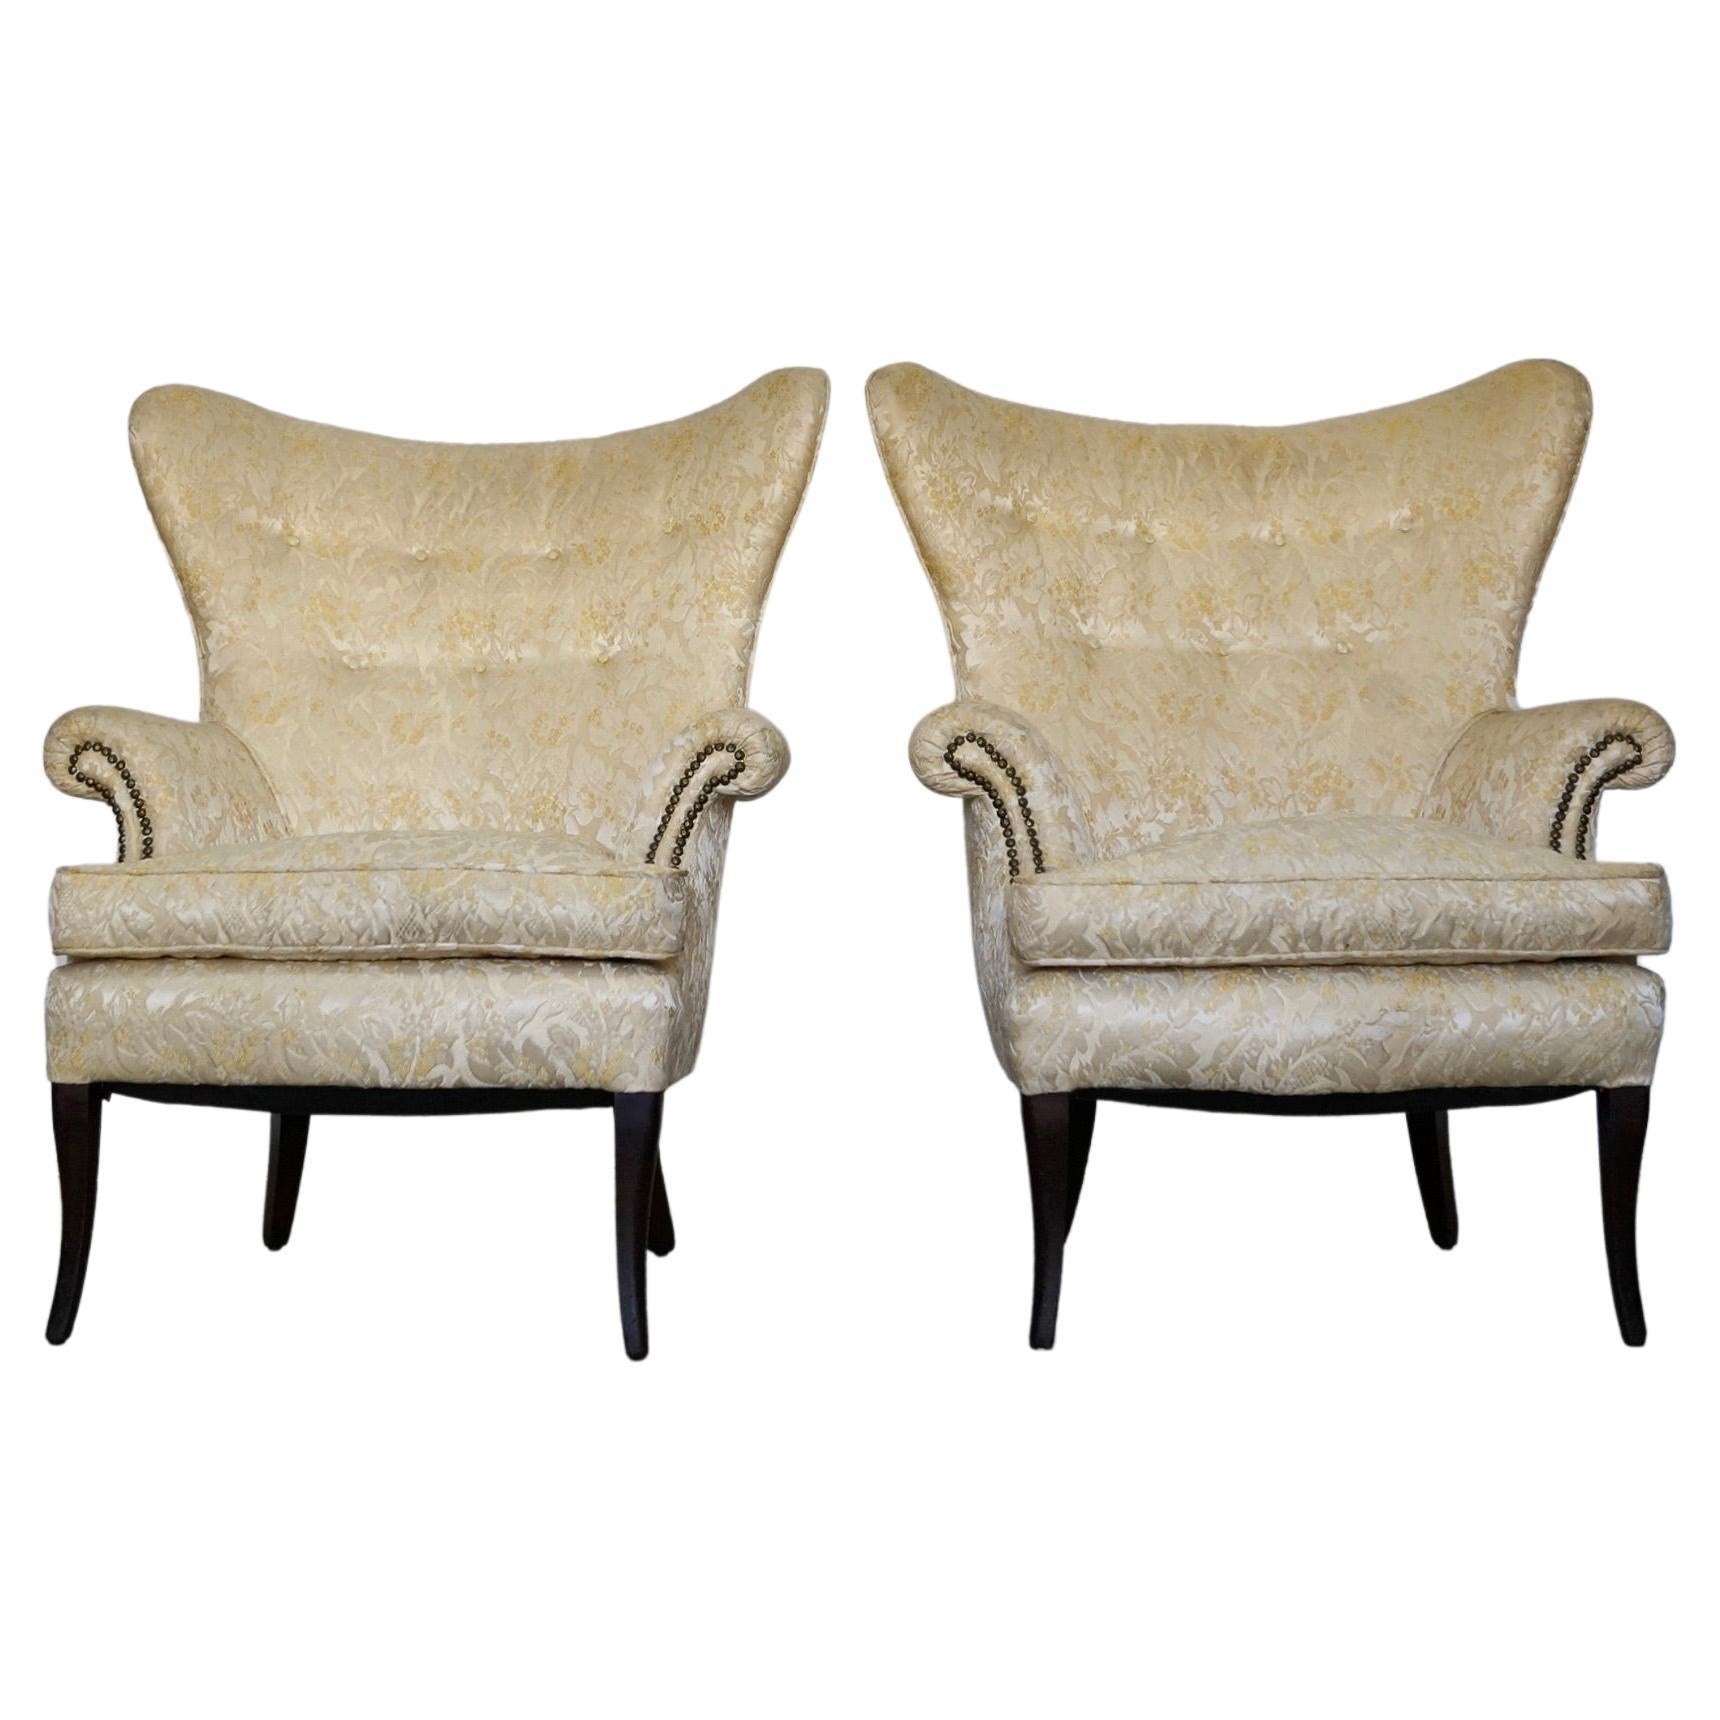 1950s Mid-Century Modern Butterfly Wingback Chairs, a Pair